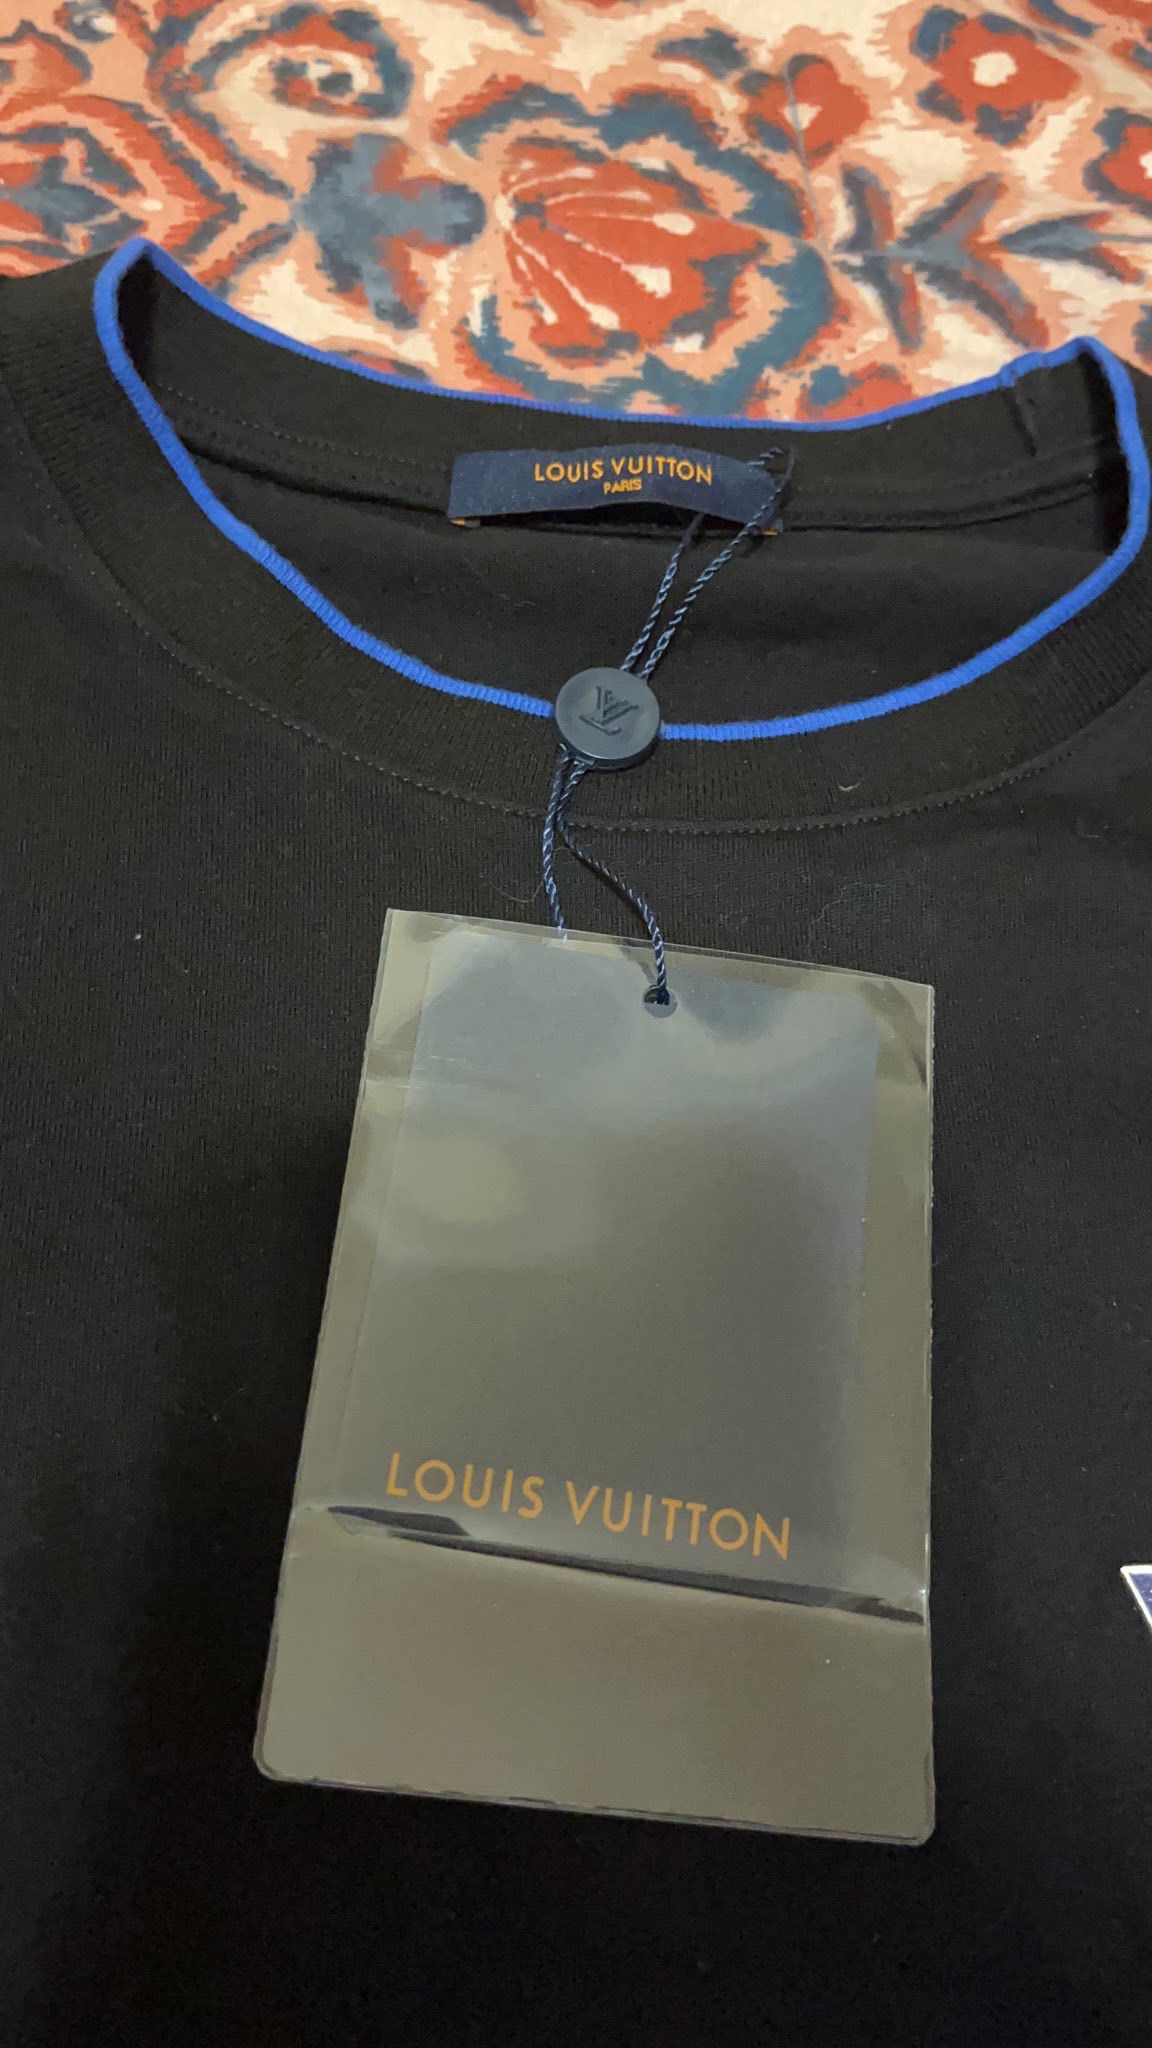 Louis Vuitton Towel Shirt for Sale in Bronx, NY - OfferUp